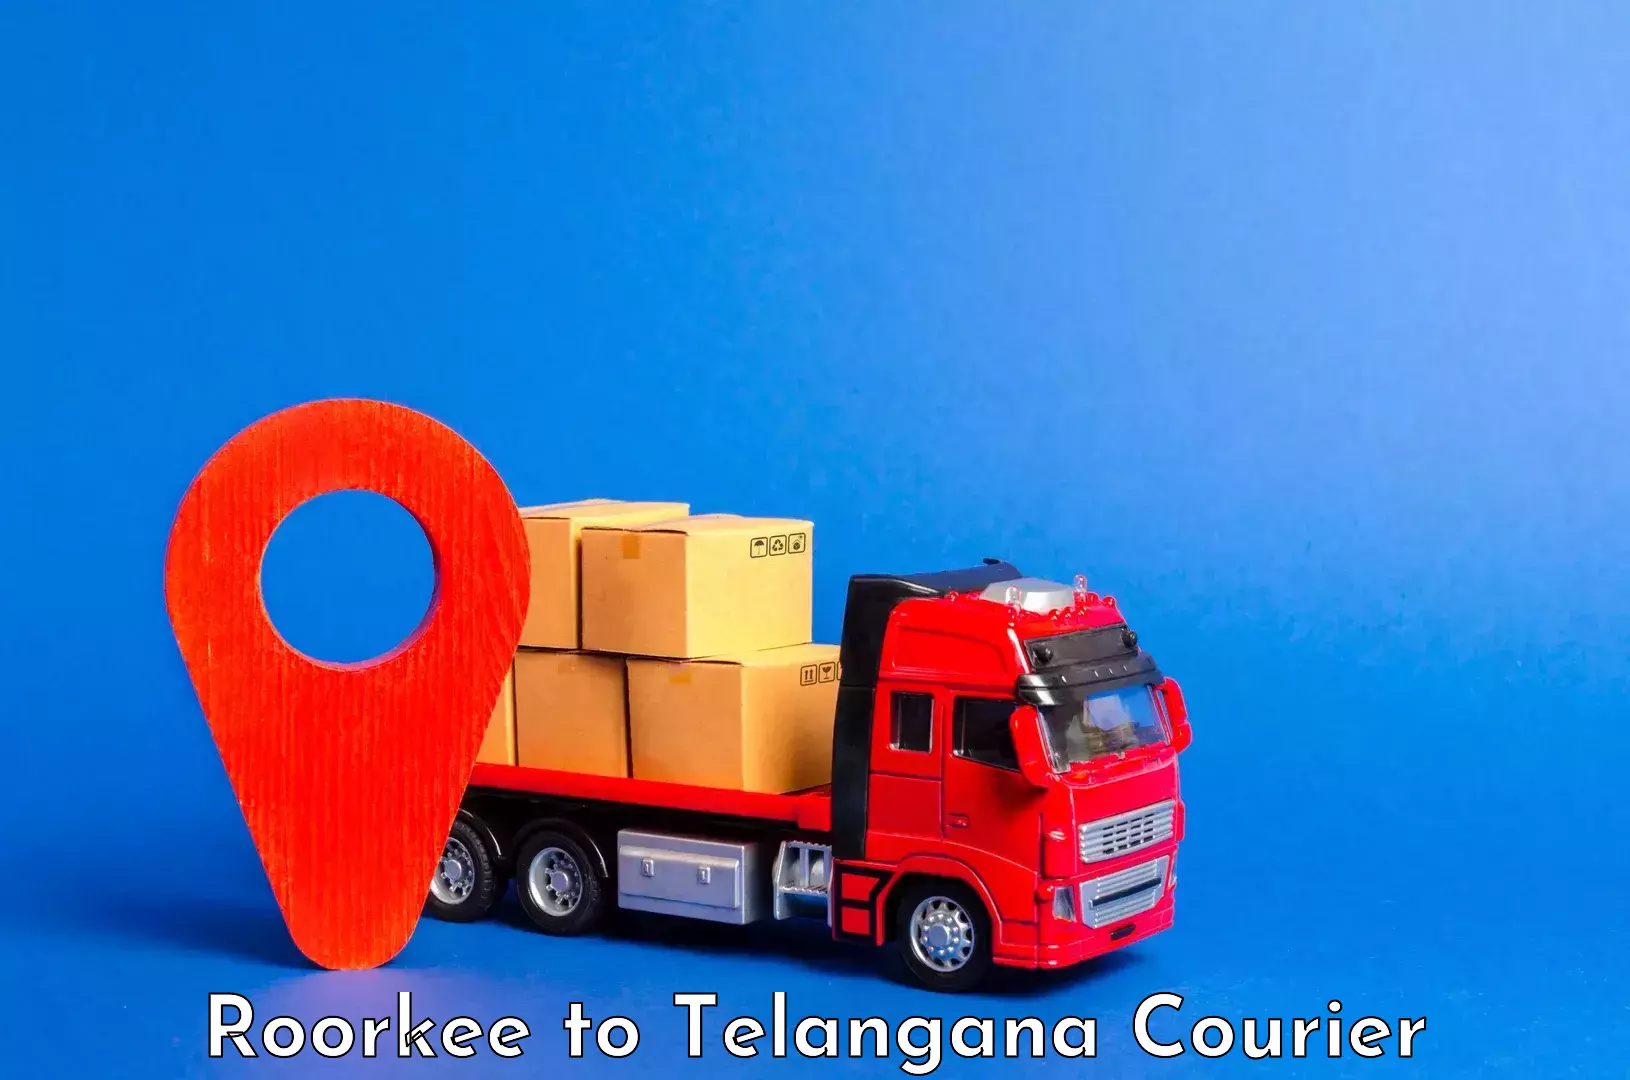 Luggage transport solutions Roorkee to Telangana